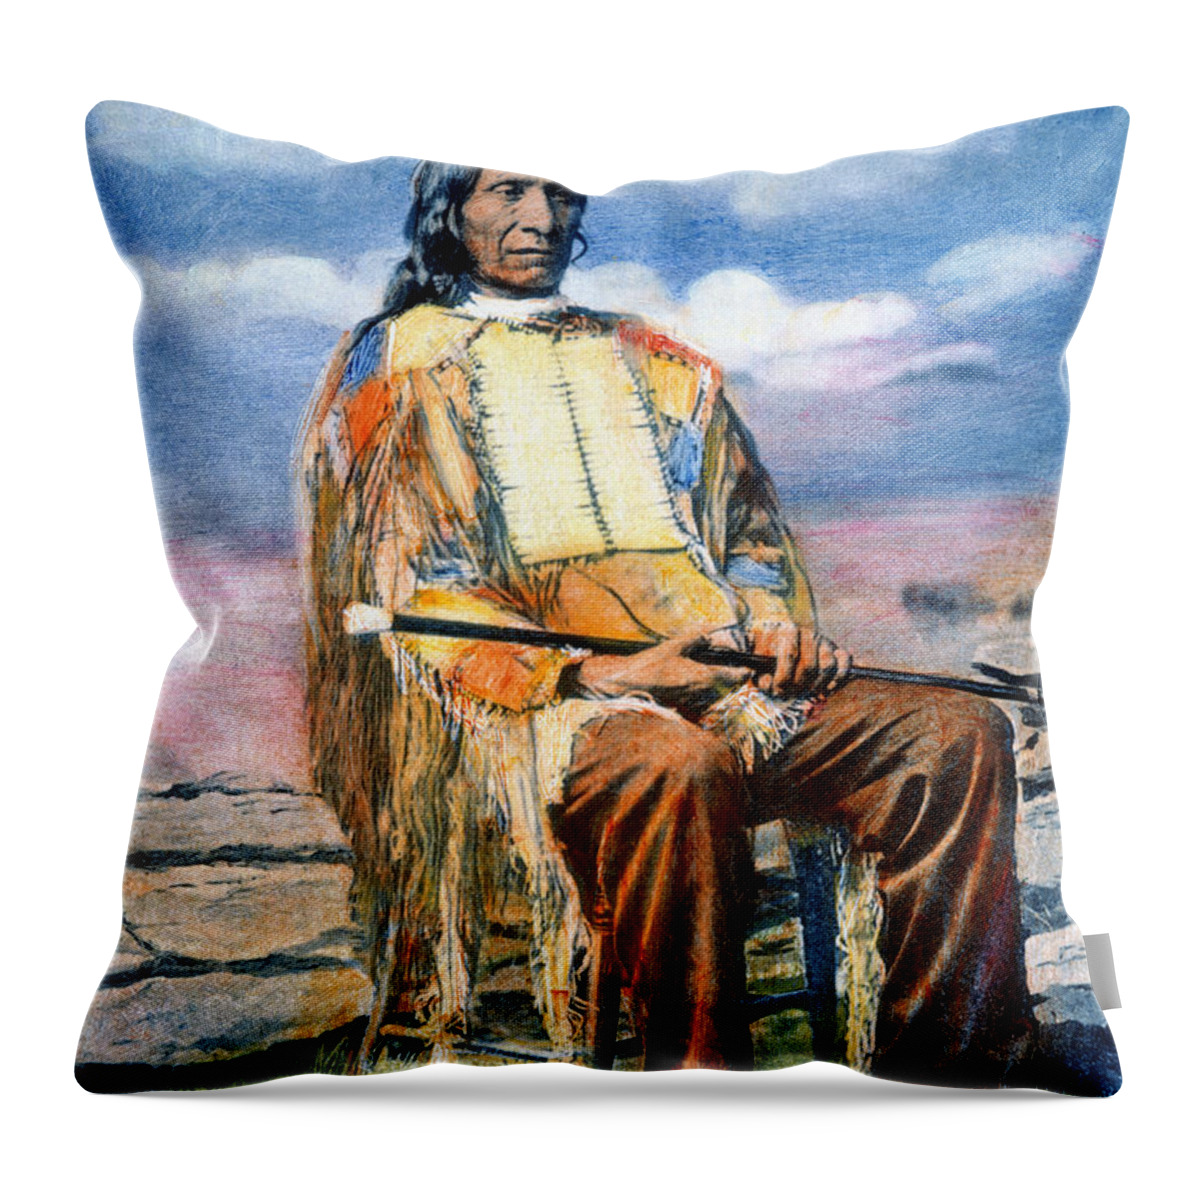 19th Century Throw Pillow featuring the photograph Red Cloud 1822-1909 by Granger